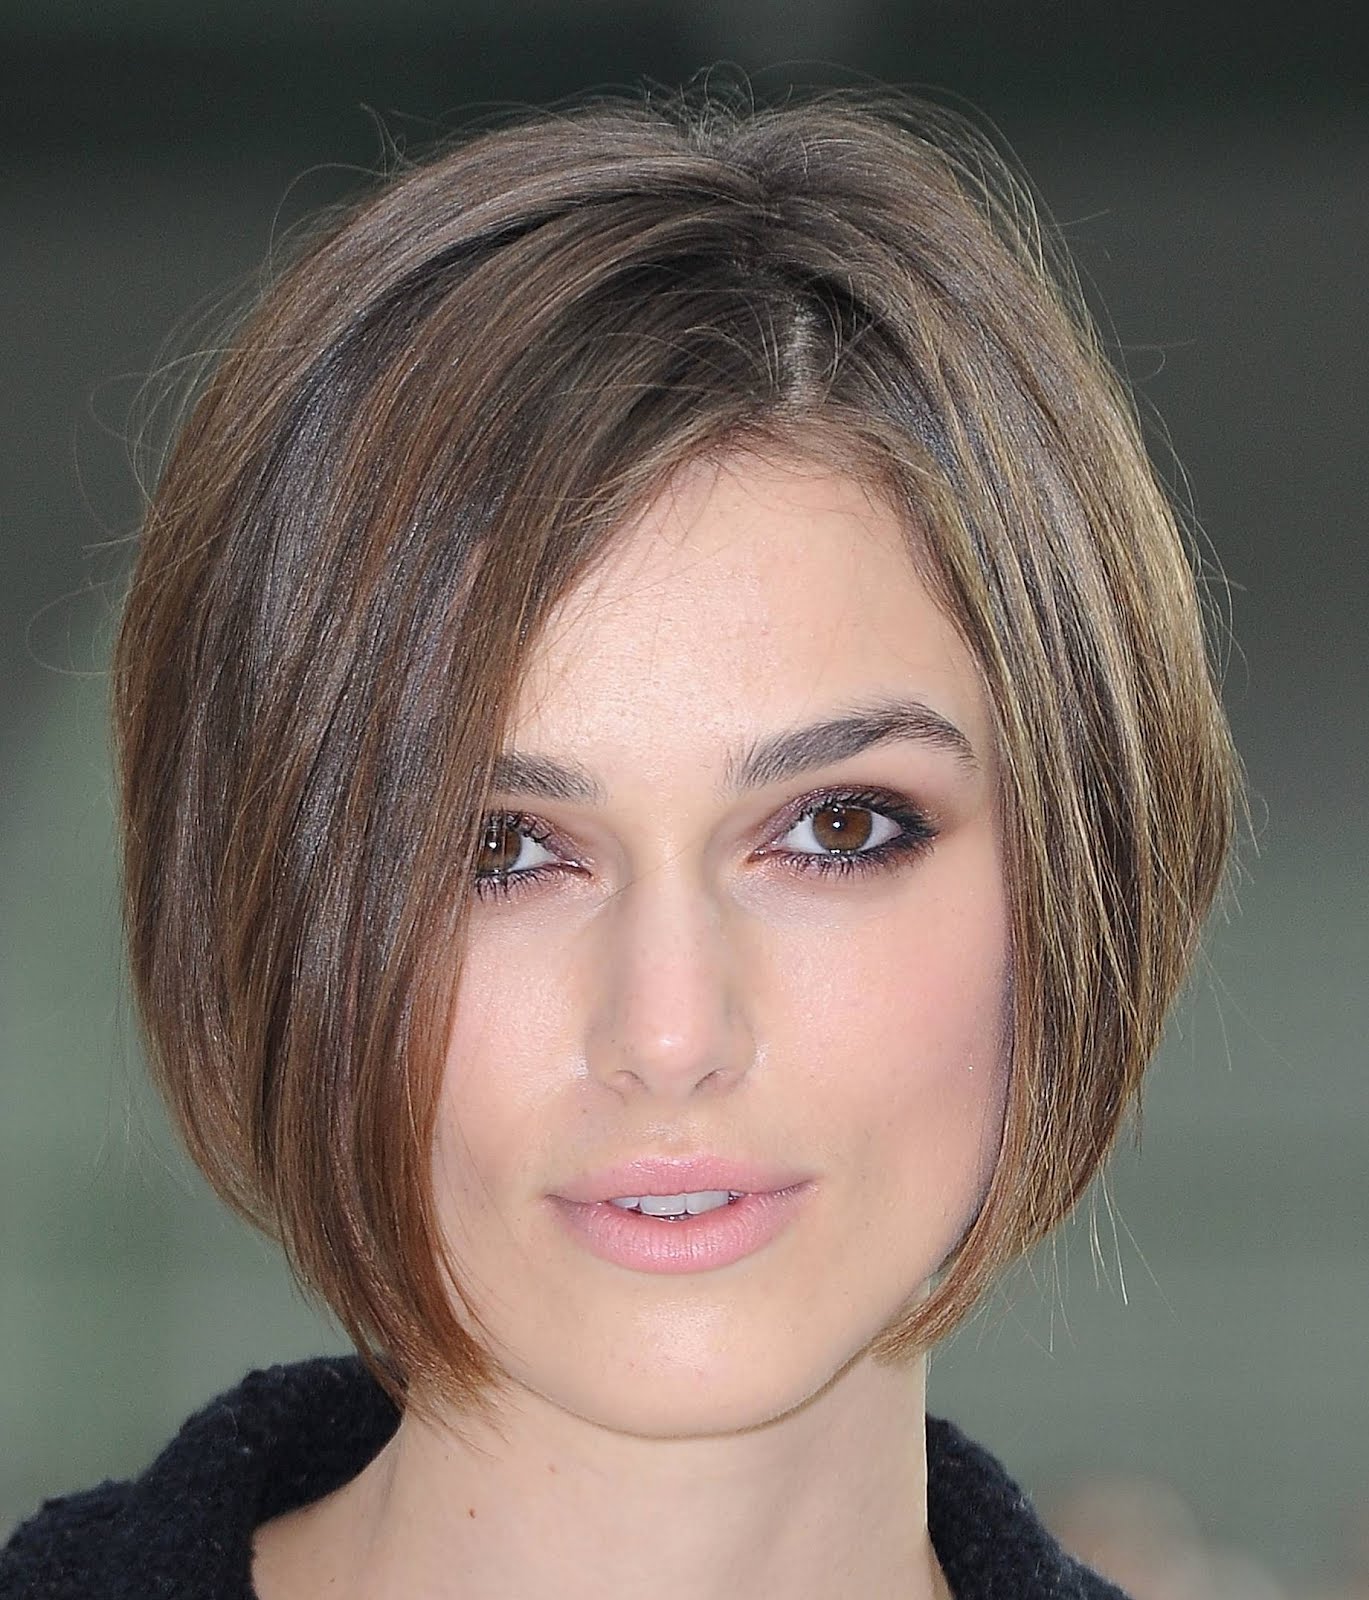 30 Best Short Hair Cuts To Improve Your Style – The WoW Style